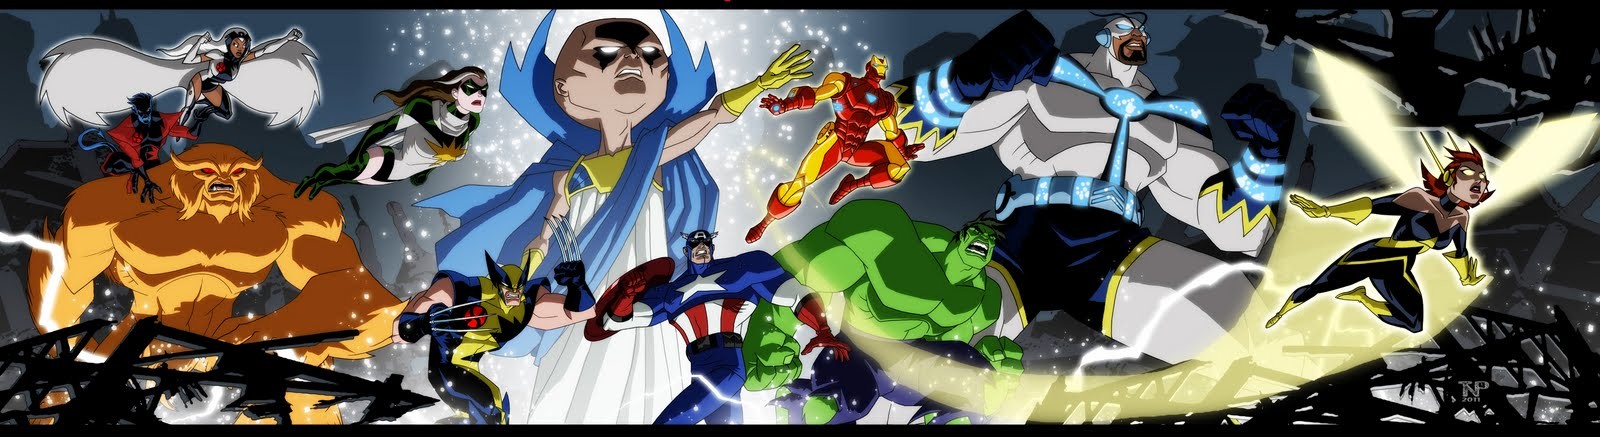 The Avengers: Earth's Mightiest Heroes Picture